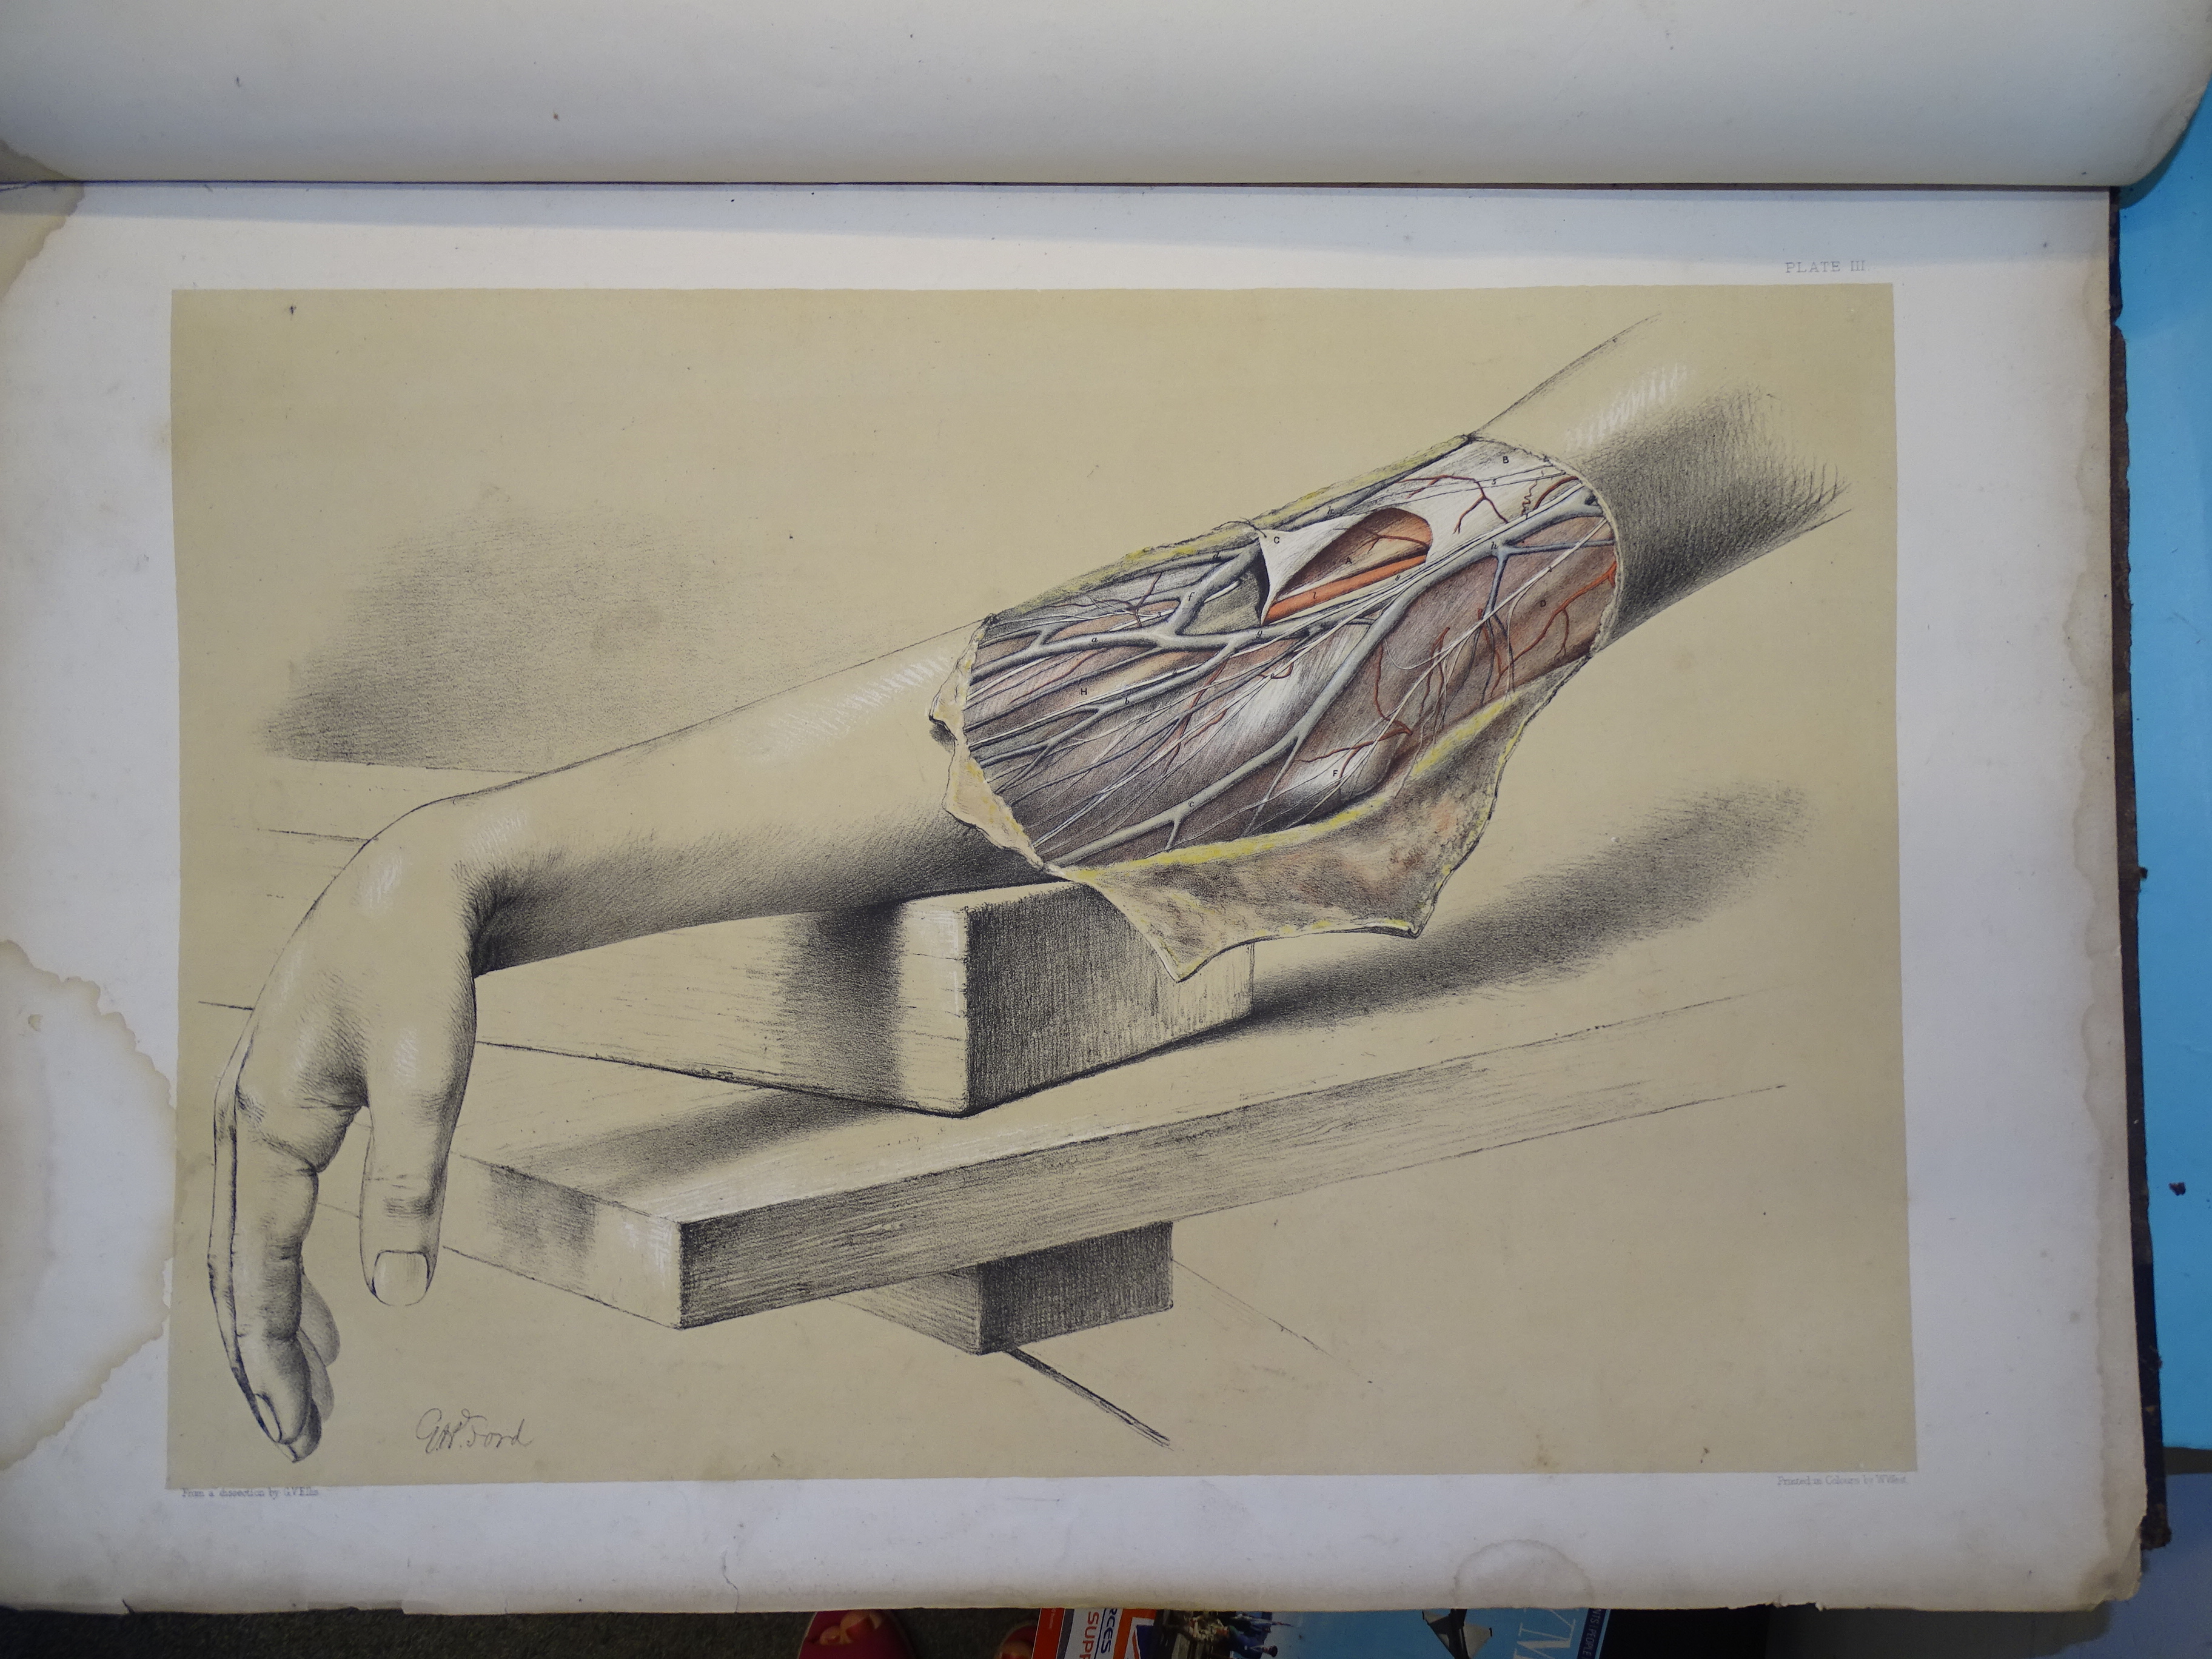 Ellis (George Viner) & Ford (G H), Illustrations of Dissections in a Series of Original Coloured - Image 2 of 9